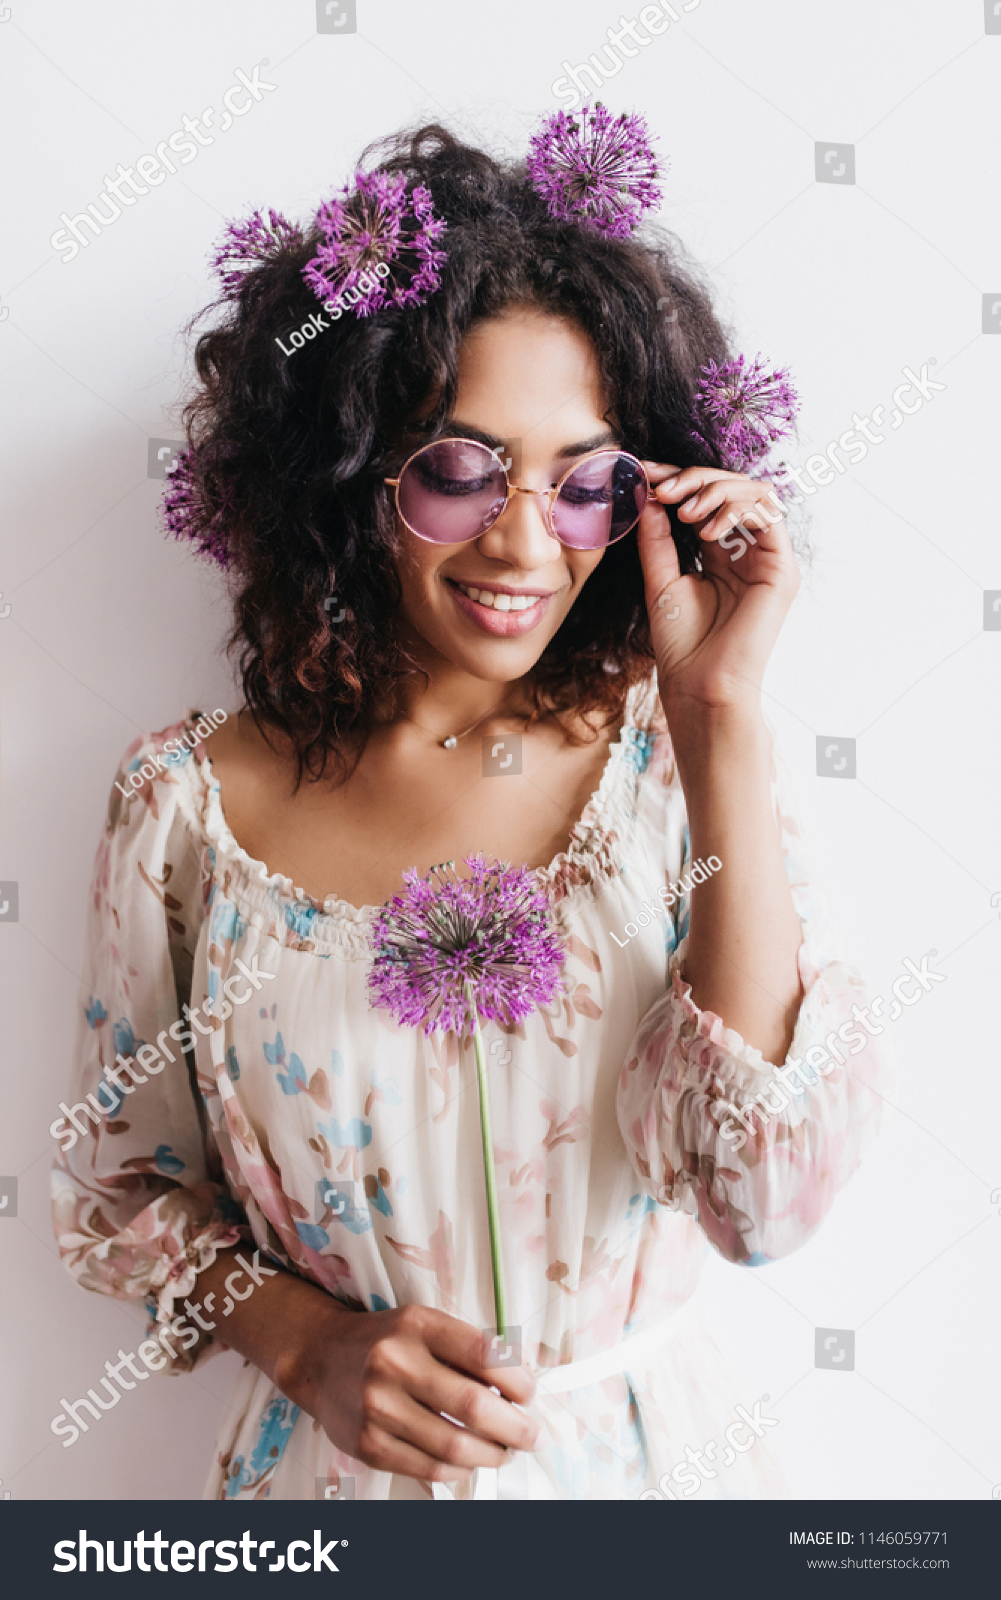 Adorable african girl with curly hairstyle holding allium. Studio shot of black lady in sunglasses posing with purple flowers. #1146059771